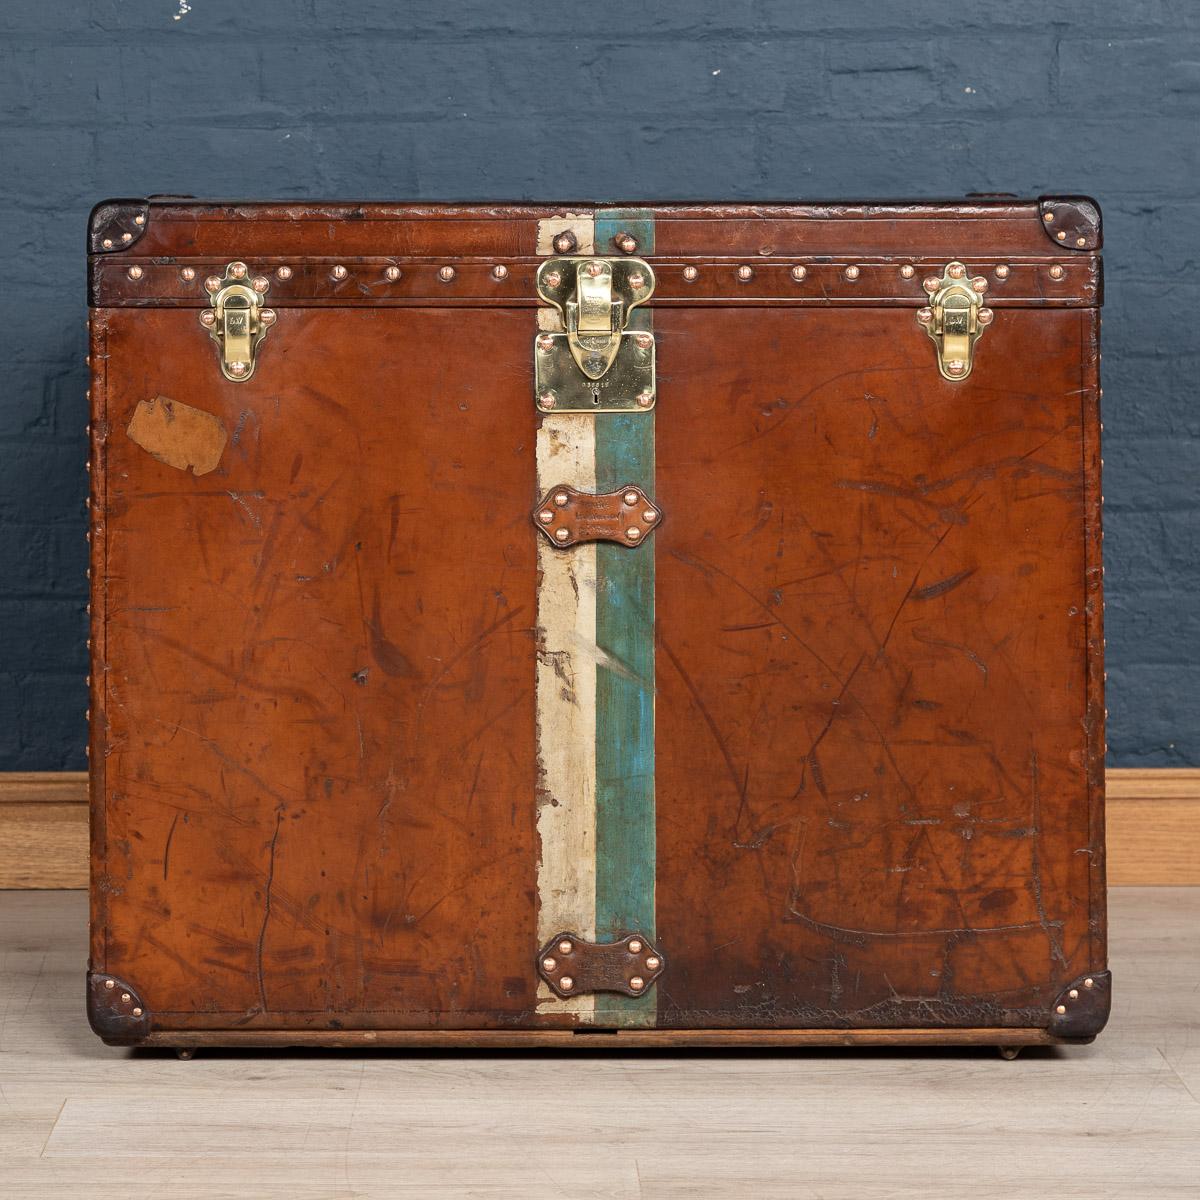 A very rare Louis Vuitton “malle haute” or “high trunk“. Dating to the early part of the 20th century, covered not in the world famous (but more common) monogram canvas but in a single piece of cow hide. These all-leather trunks were made by special